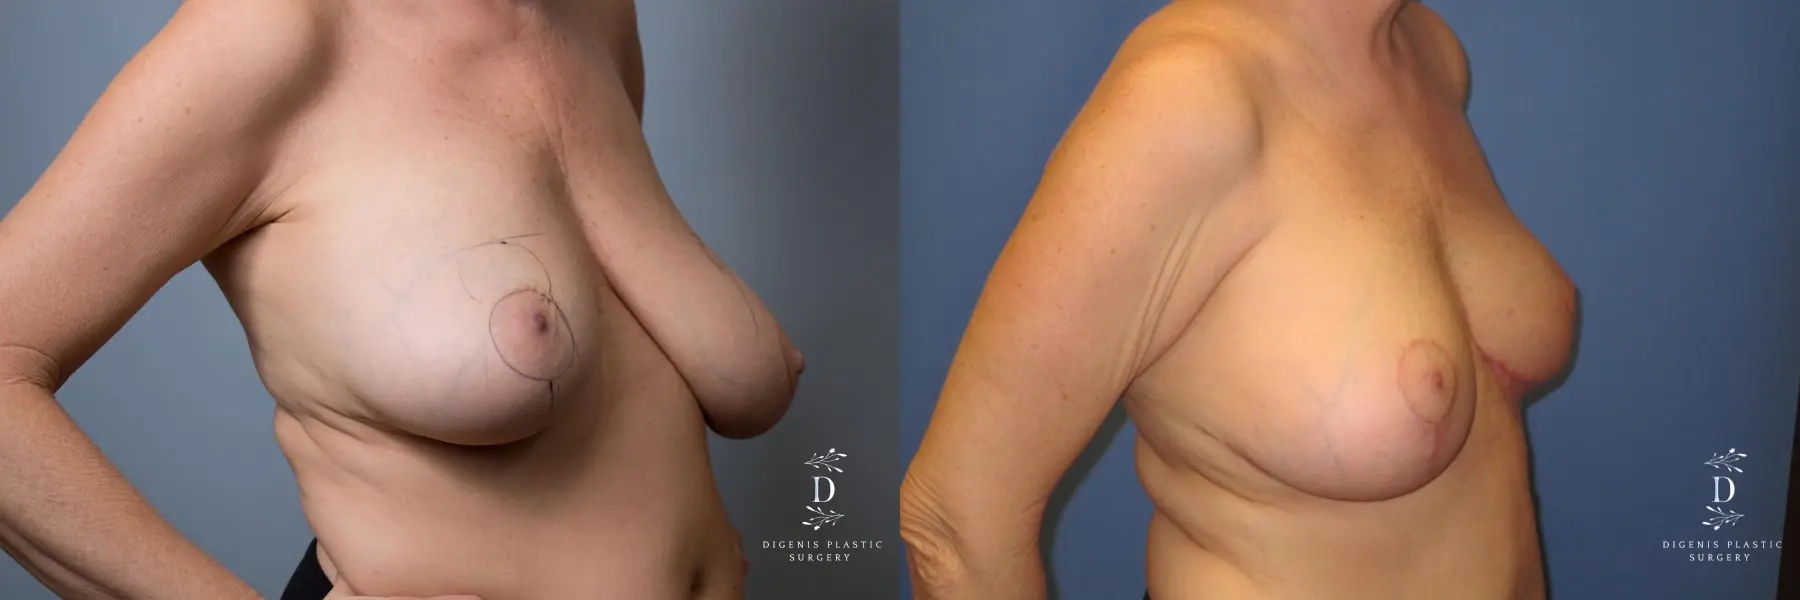 Breast Lift: Patient 6 - Before and After 2